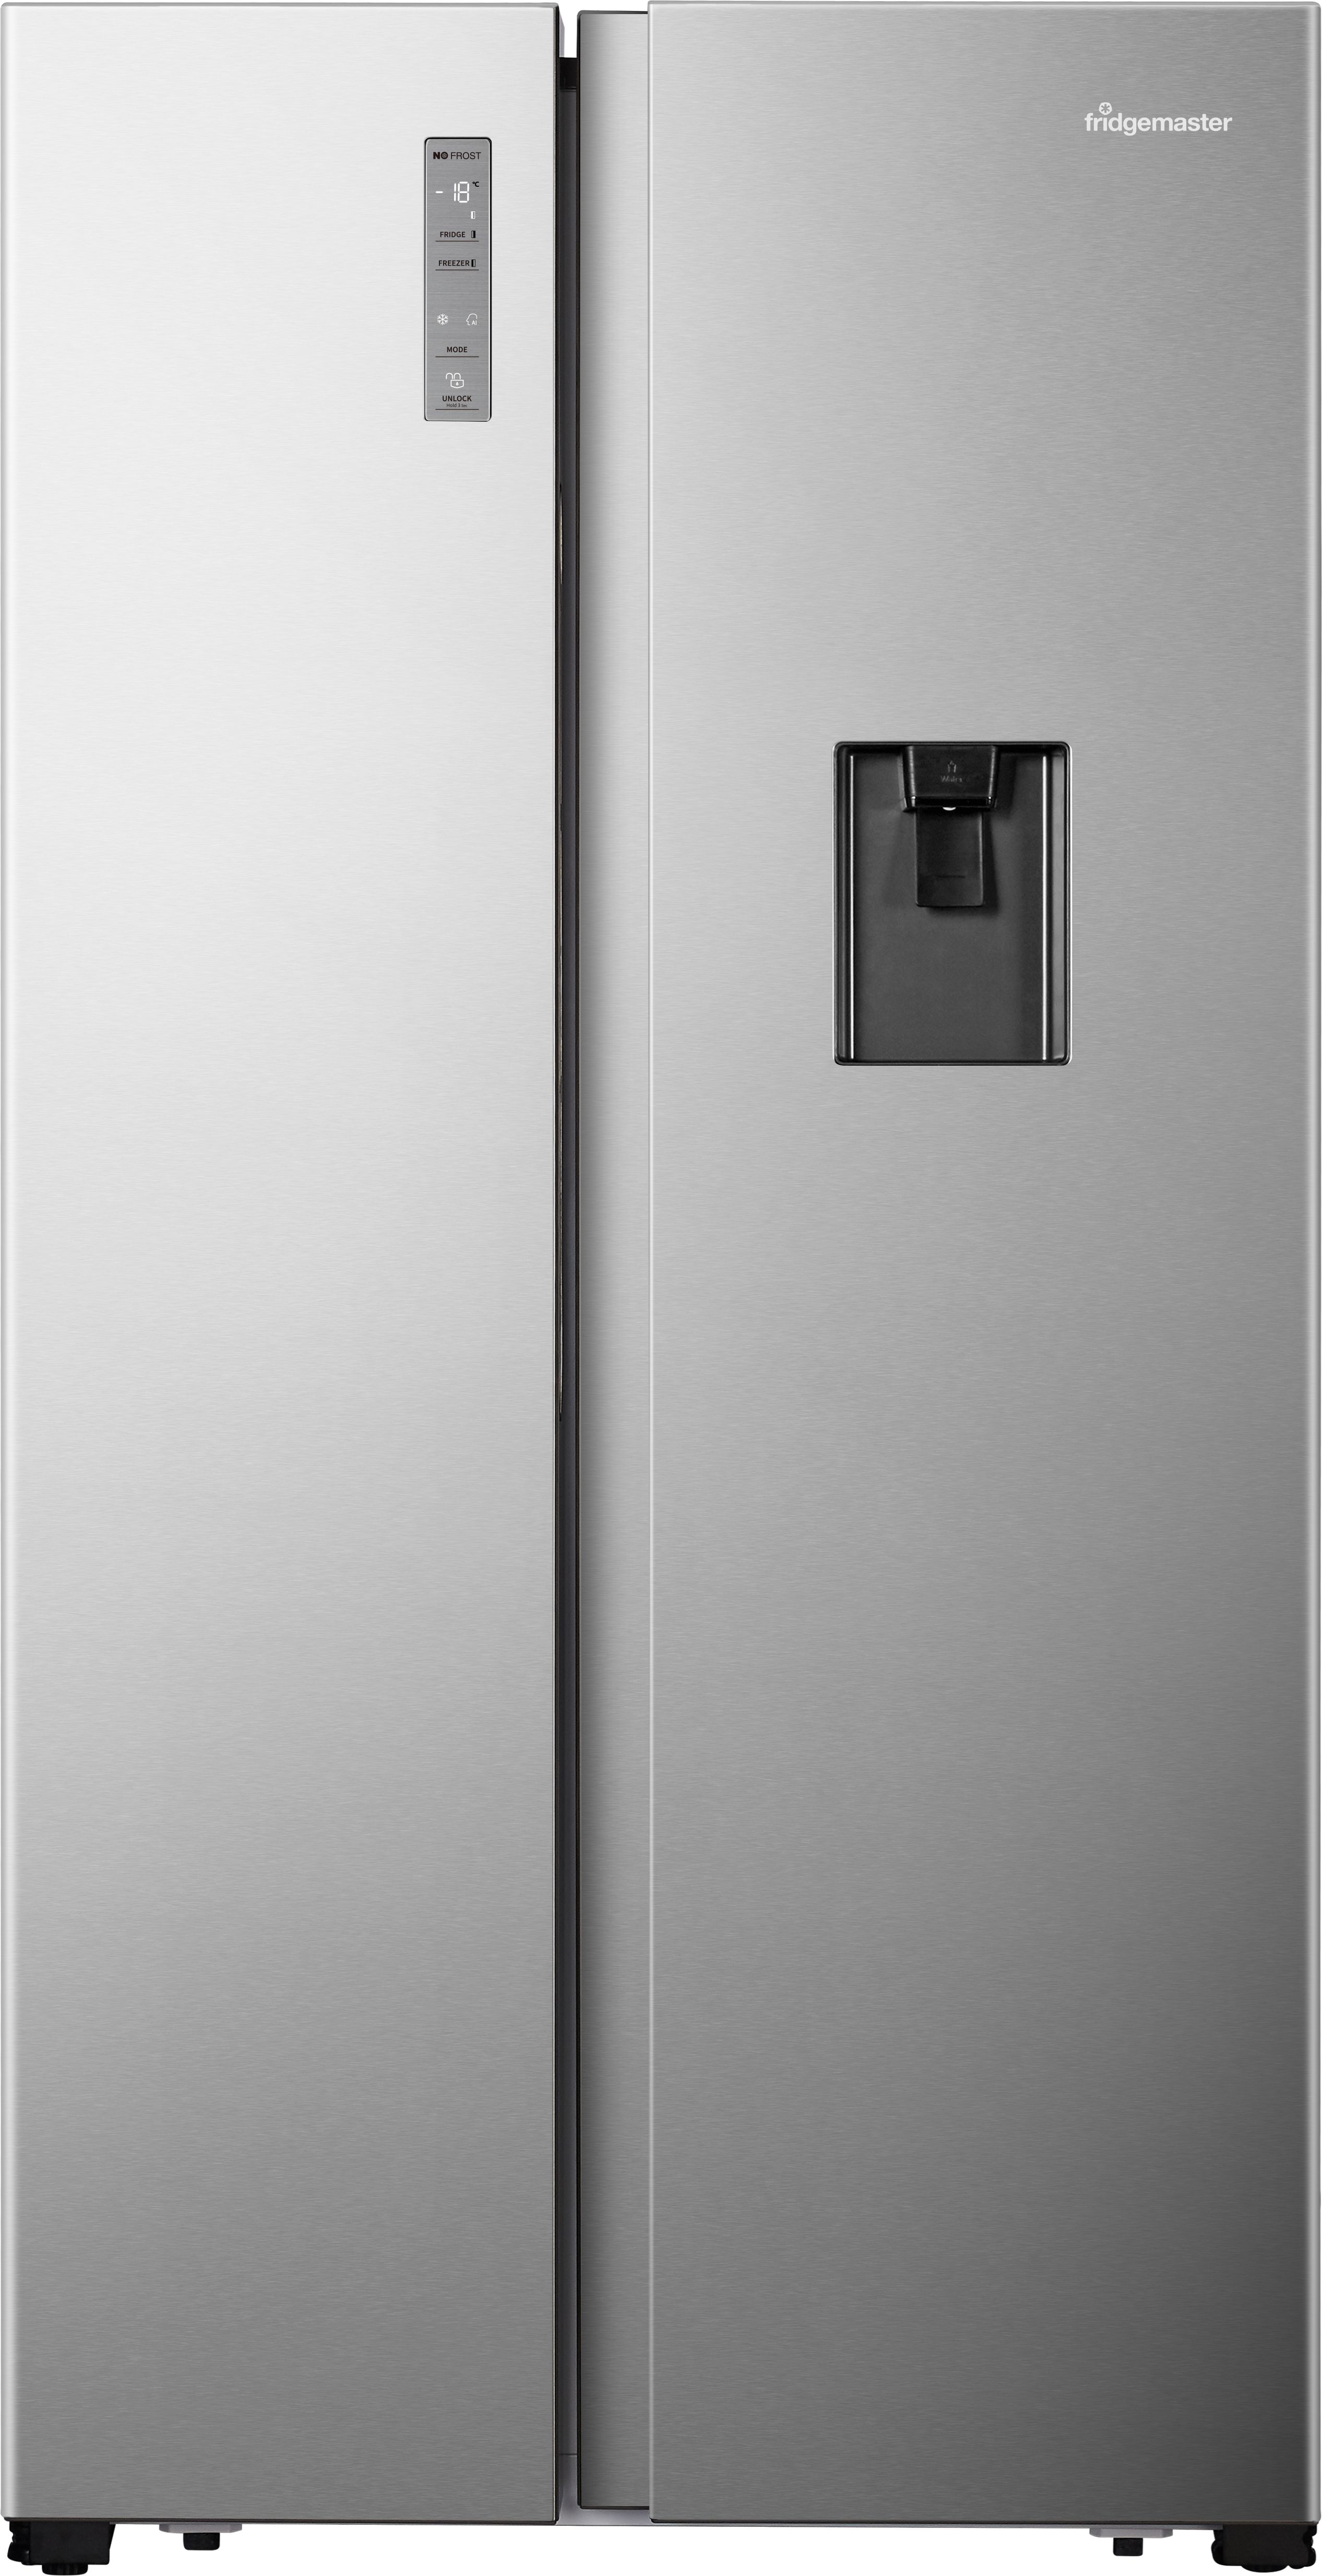 Fridgemaster MS91520DES Non-Plumbed Total No Frost American Fridge Freezer - Silver - E Rated, Silver